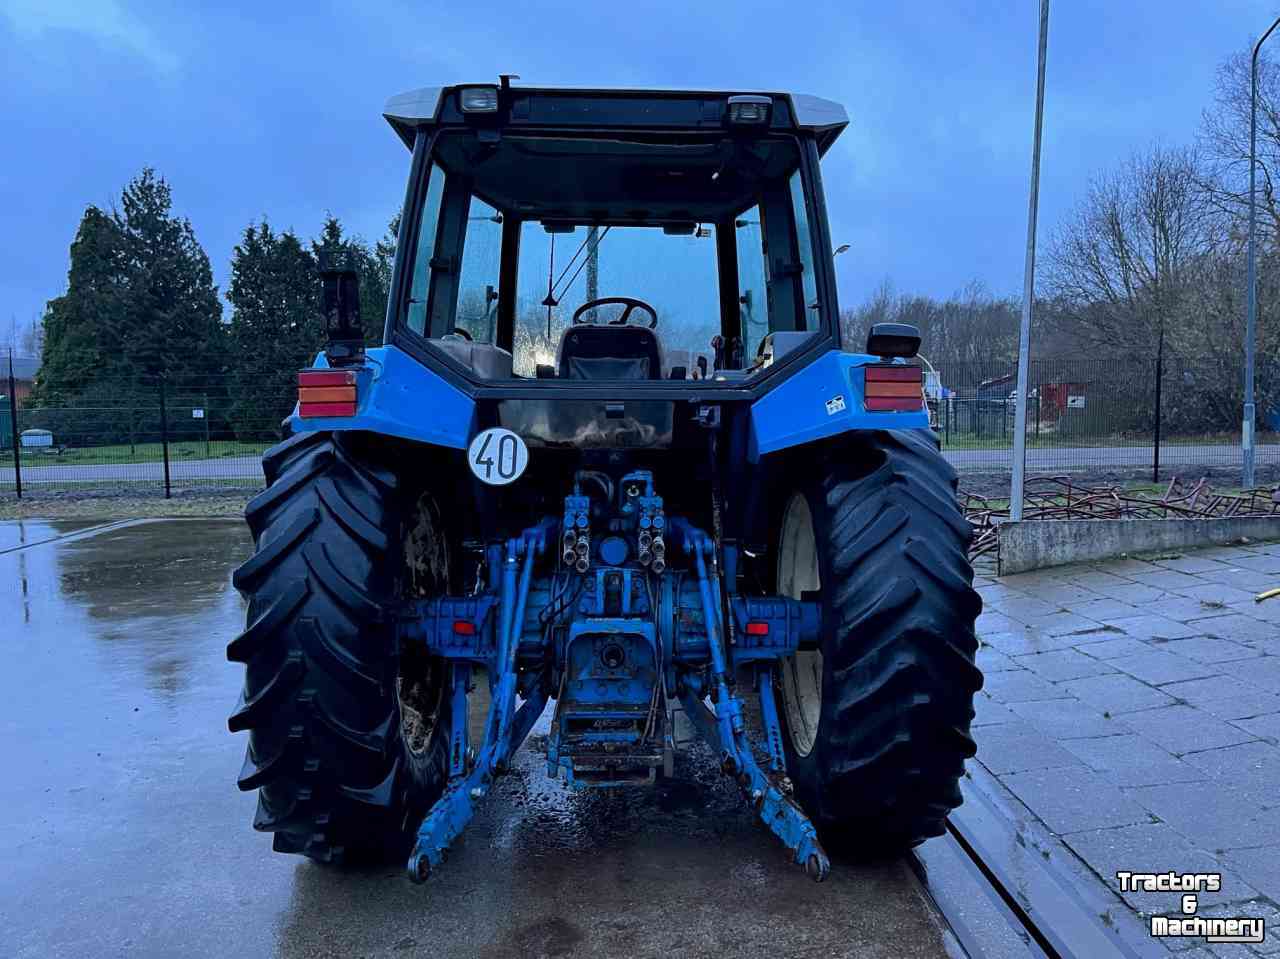 Tracteurs Ford 8340 SLE